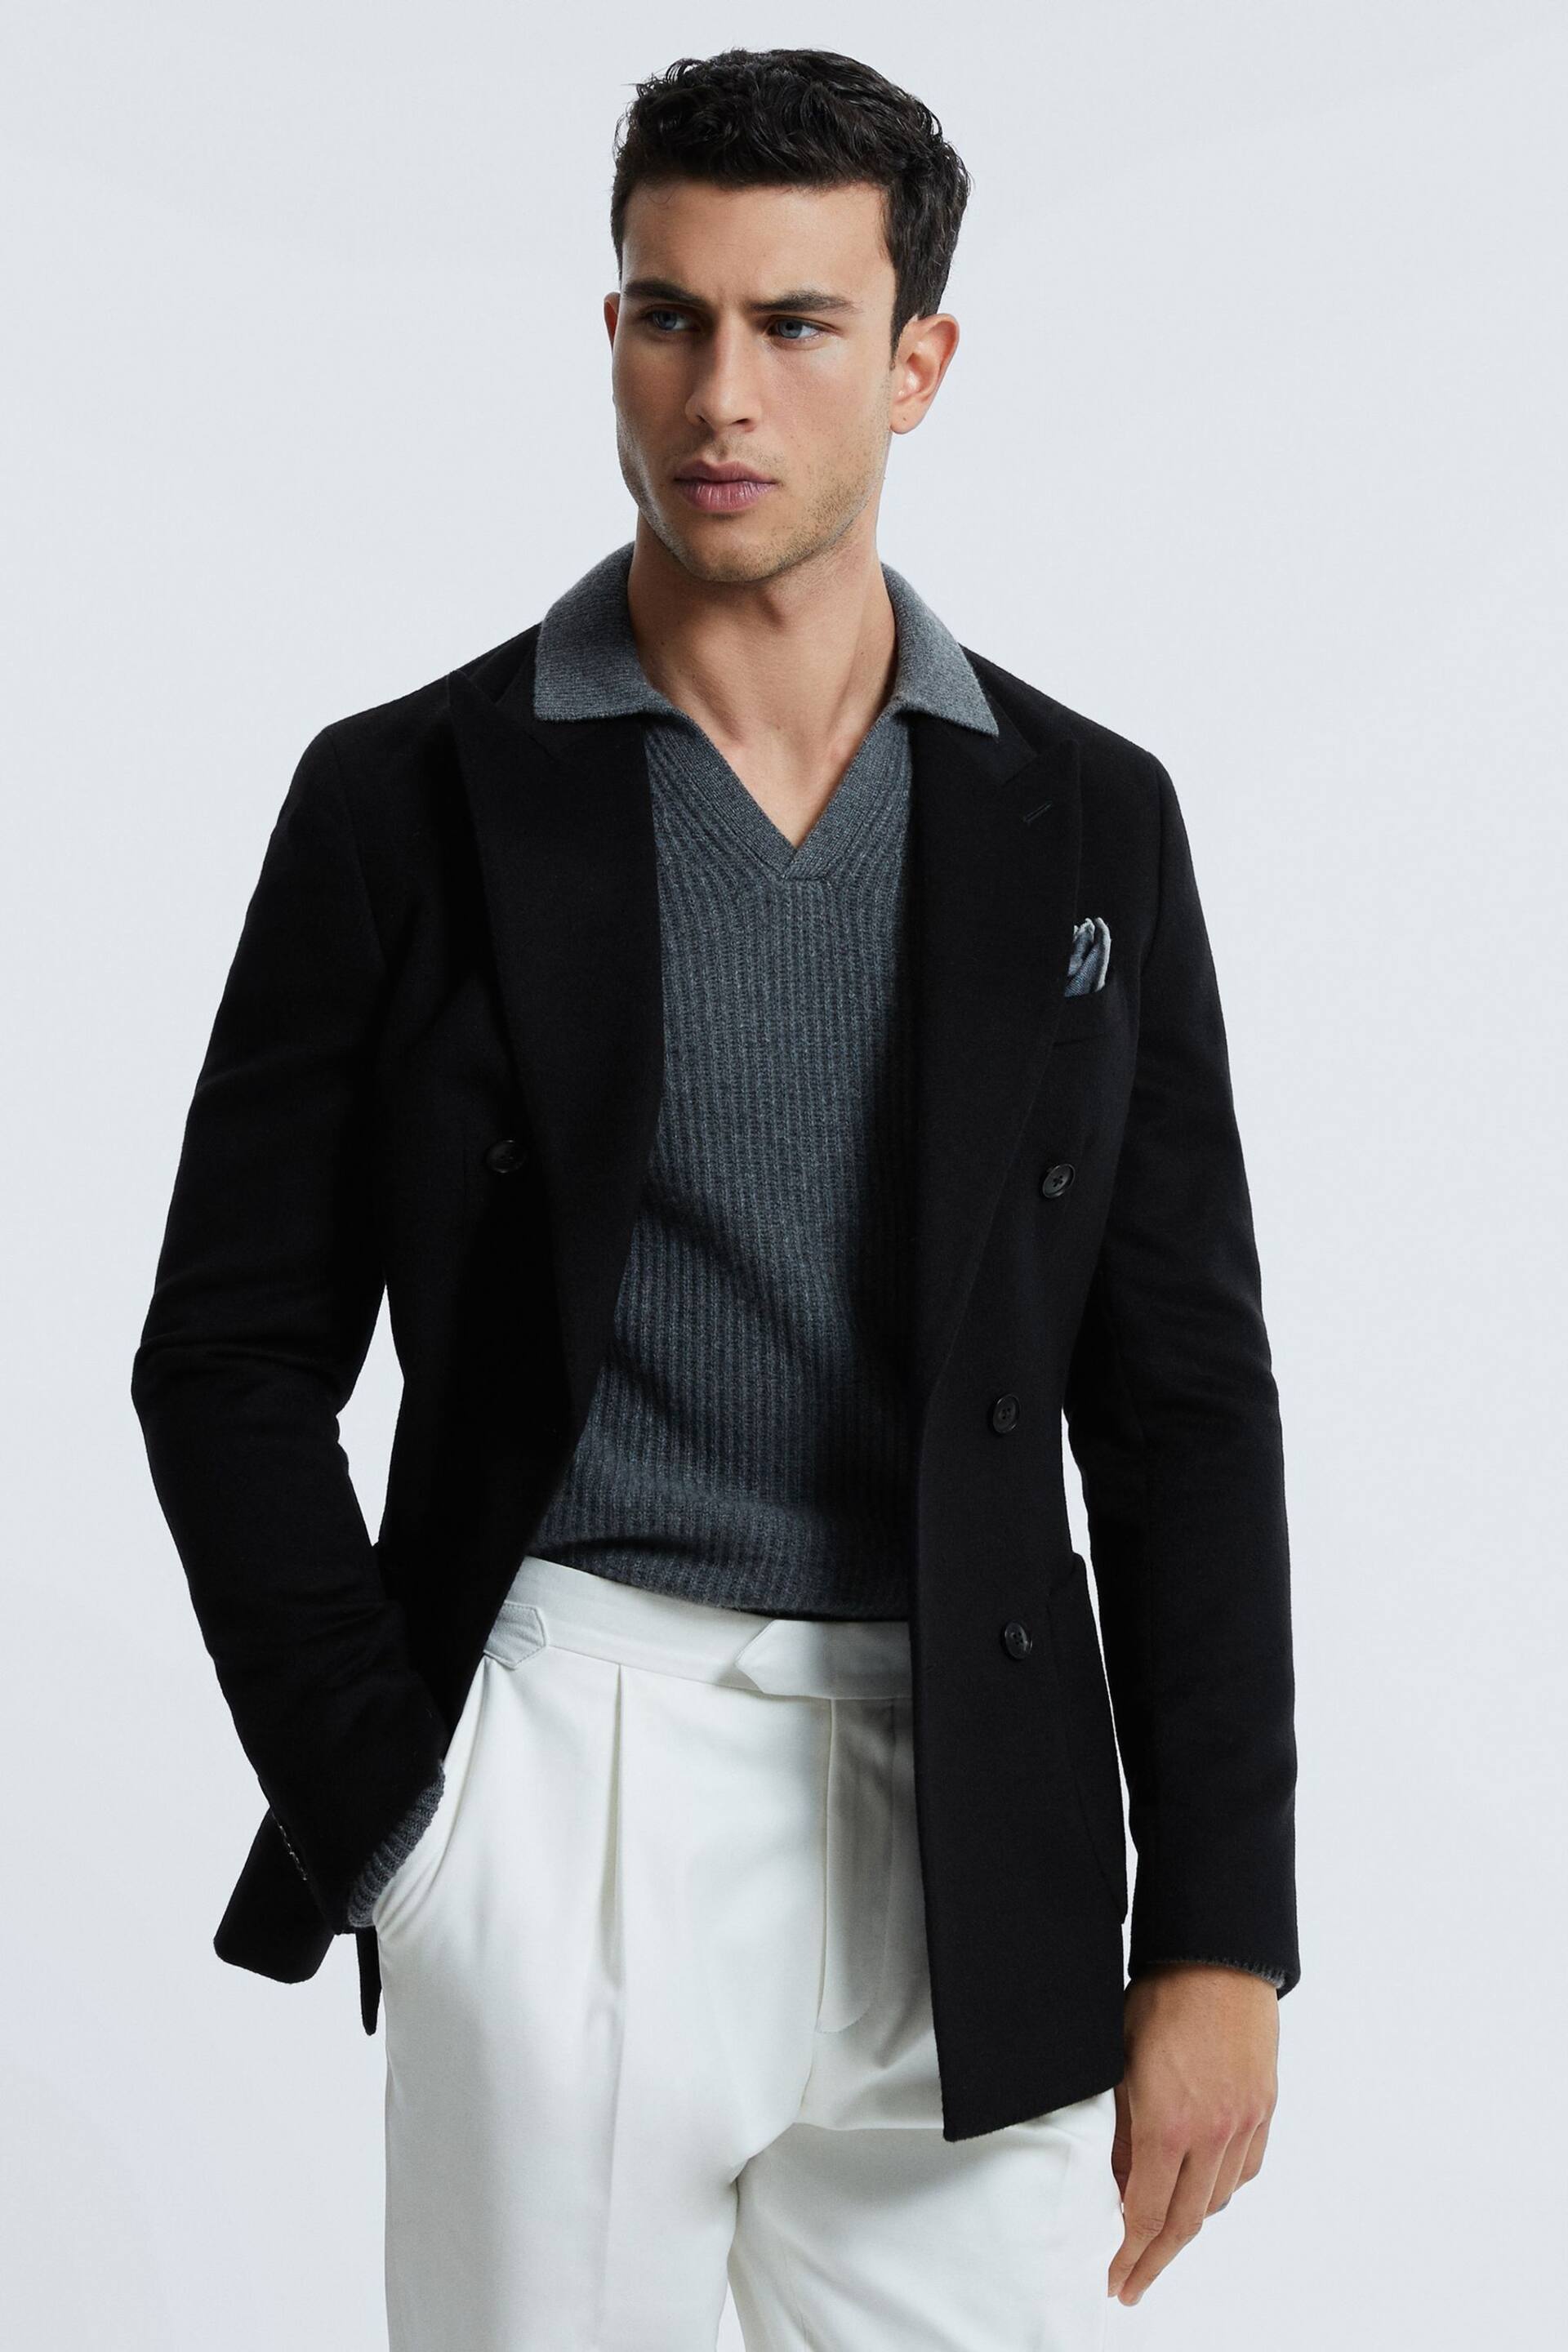 Atelier Cashmere Modern Fit Double Breasted Blazer - Image 1 of 7